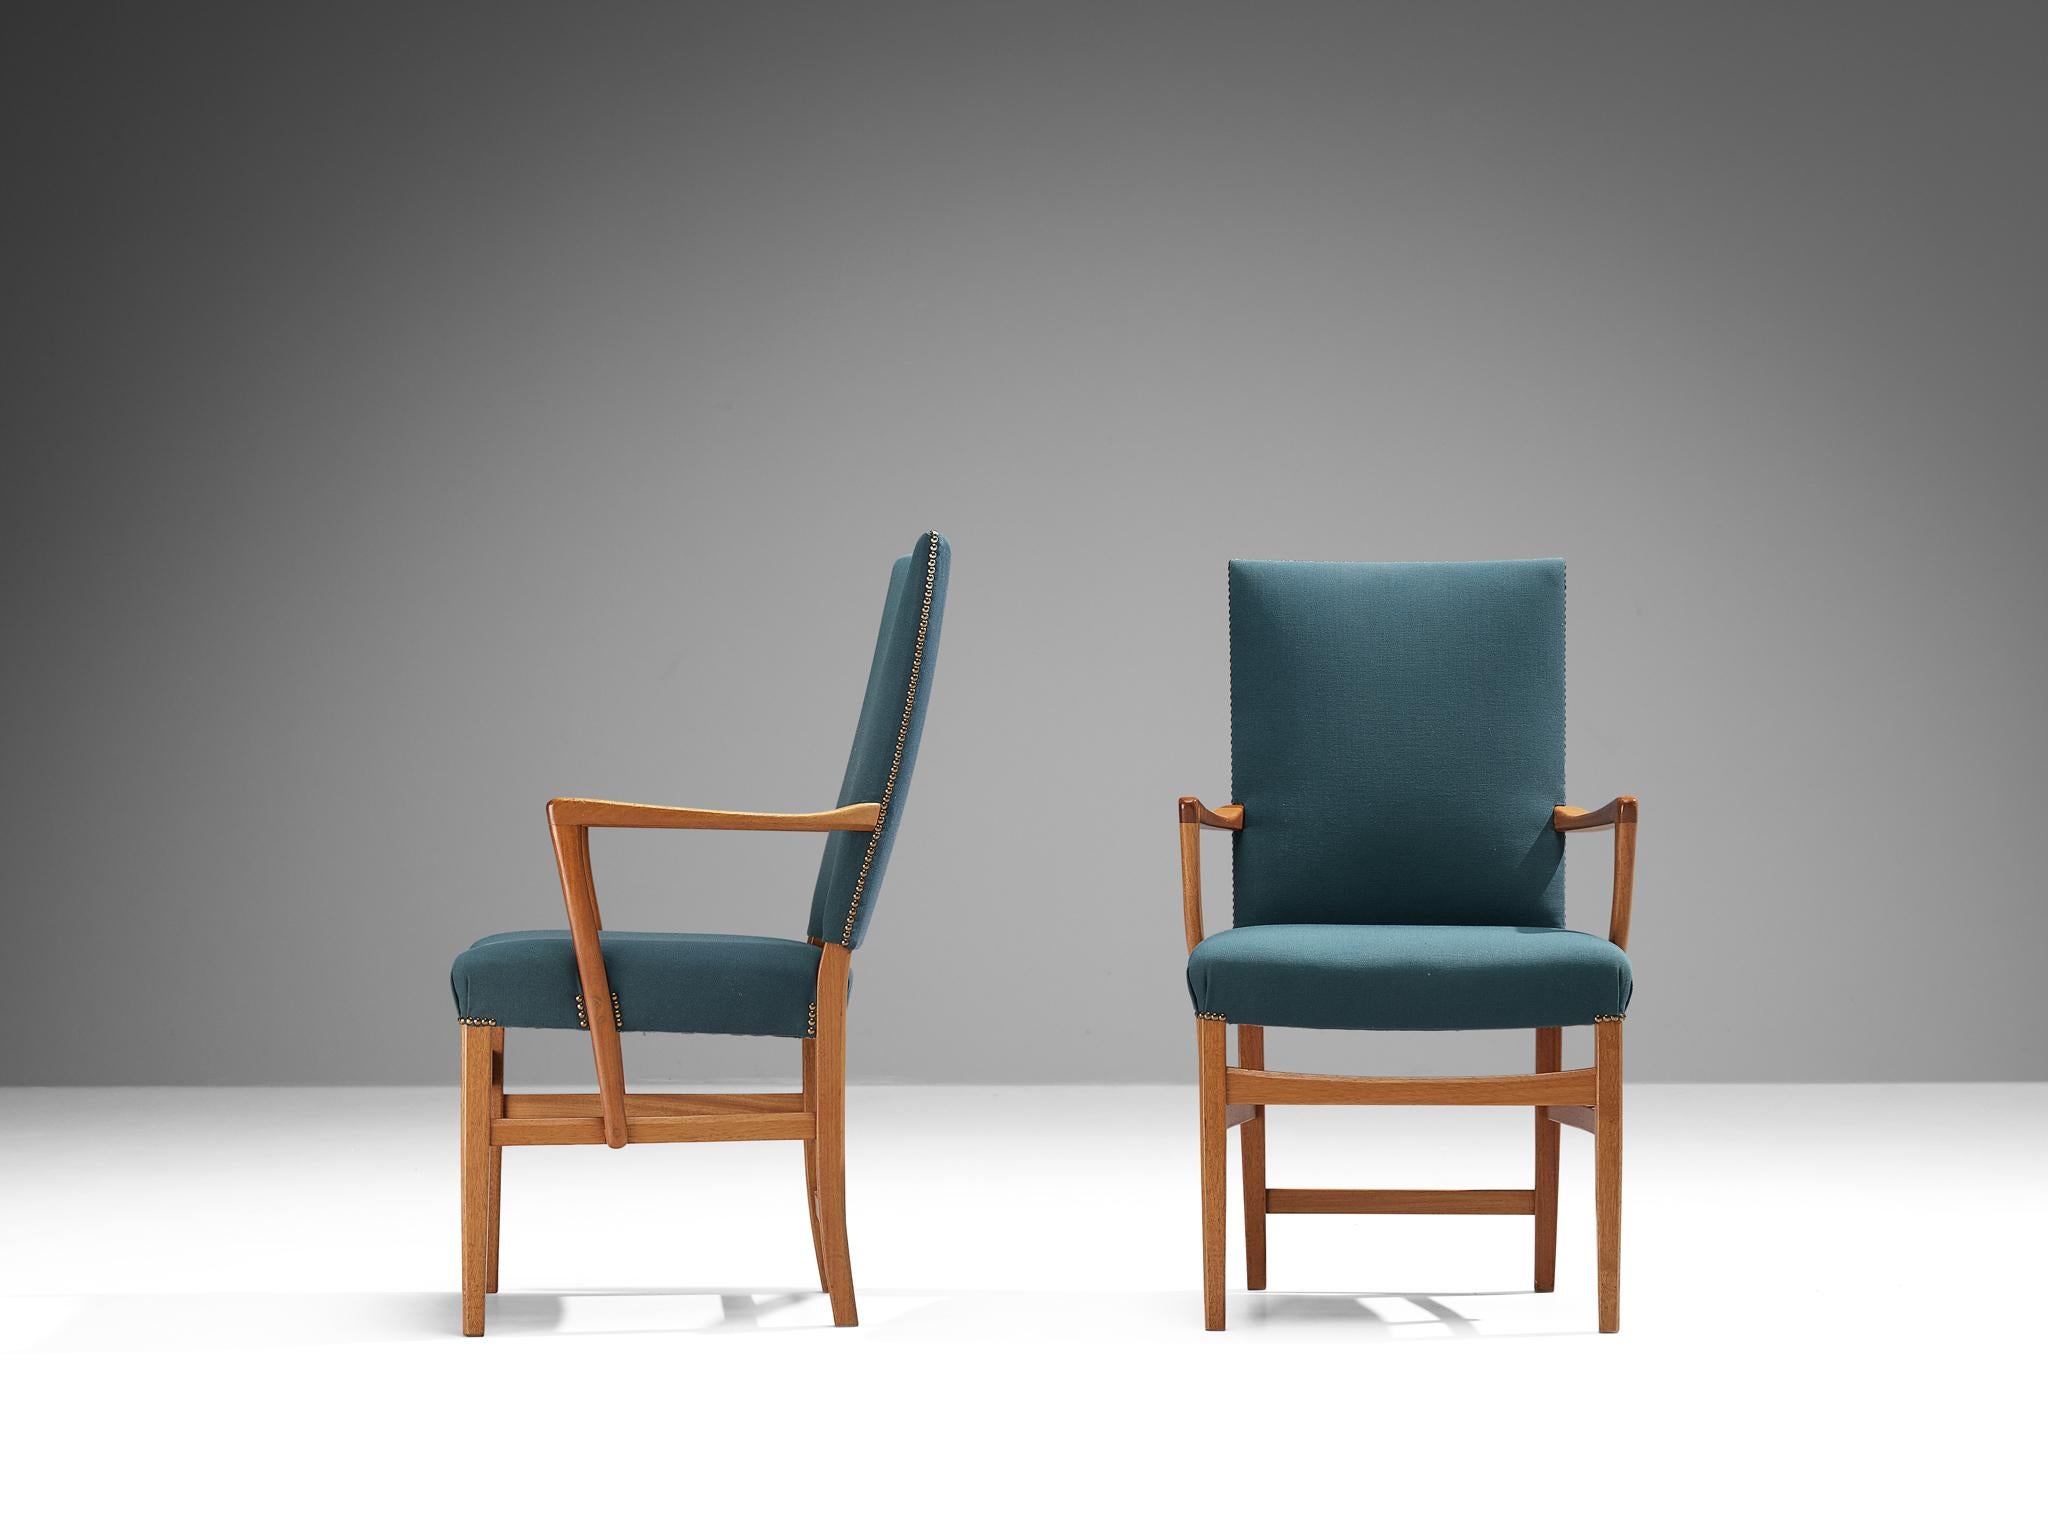 Fabric Carl Malmsten Set of Ten Armchairs in Teak and Green-Blue Upholstery